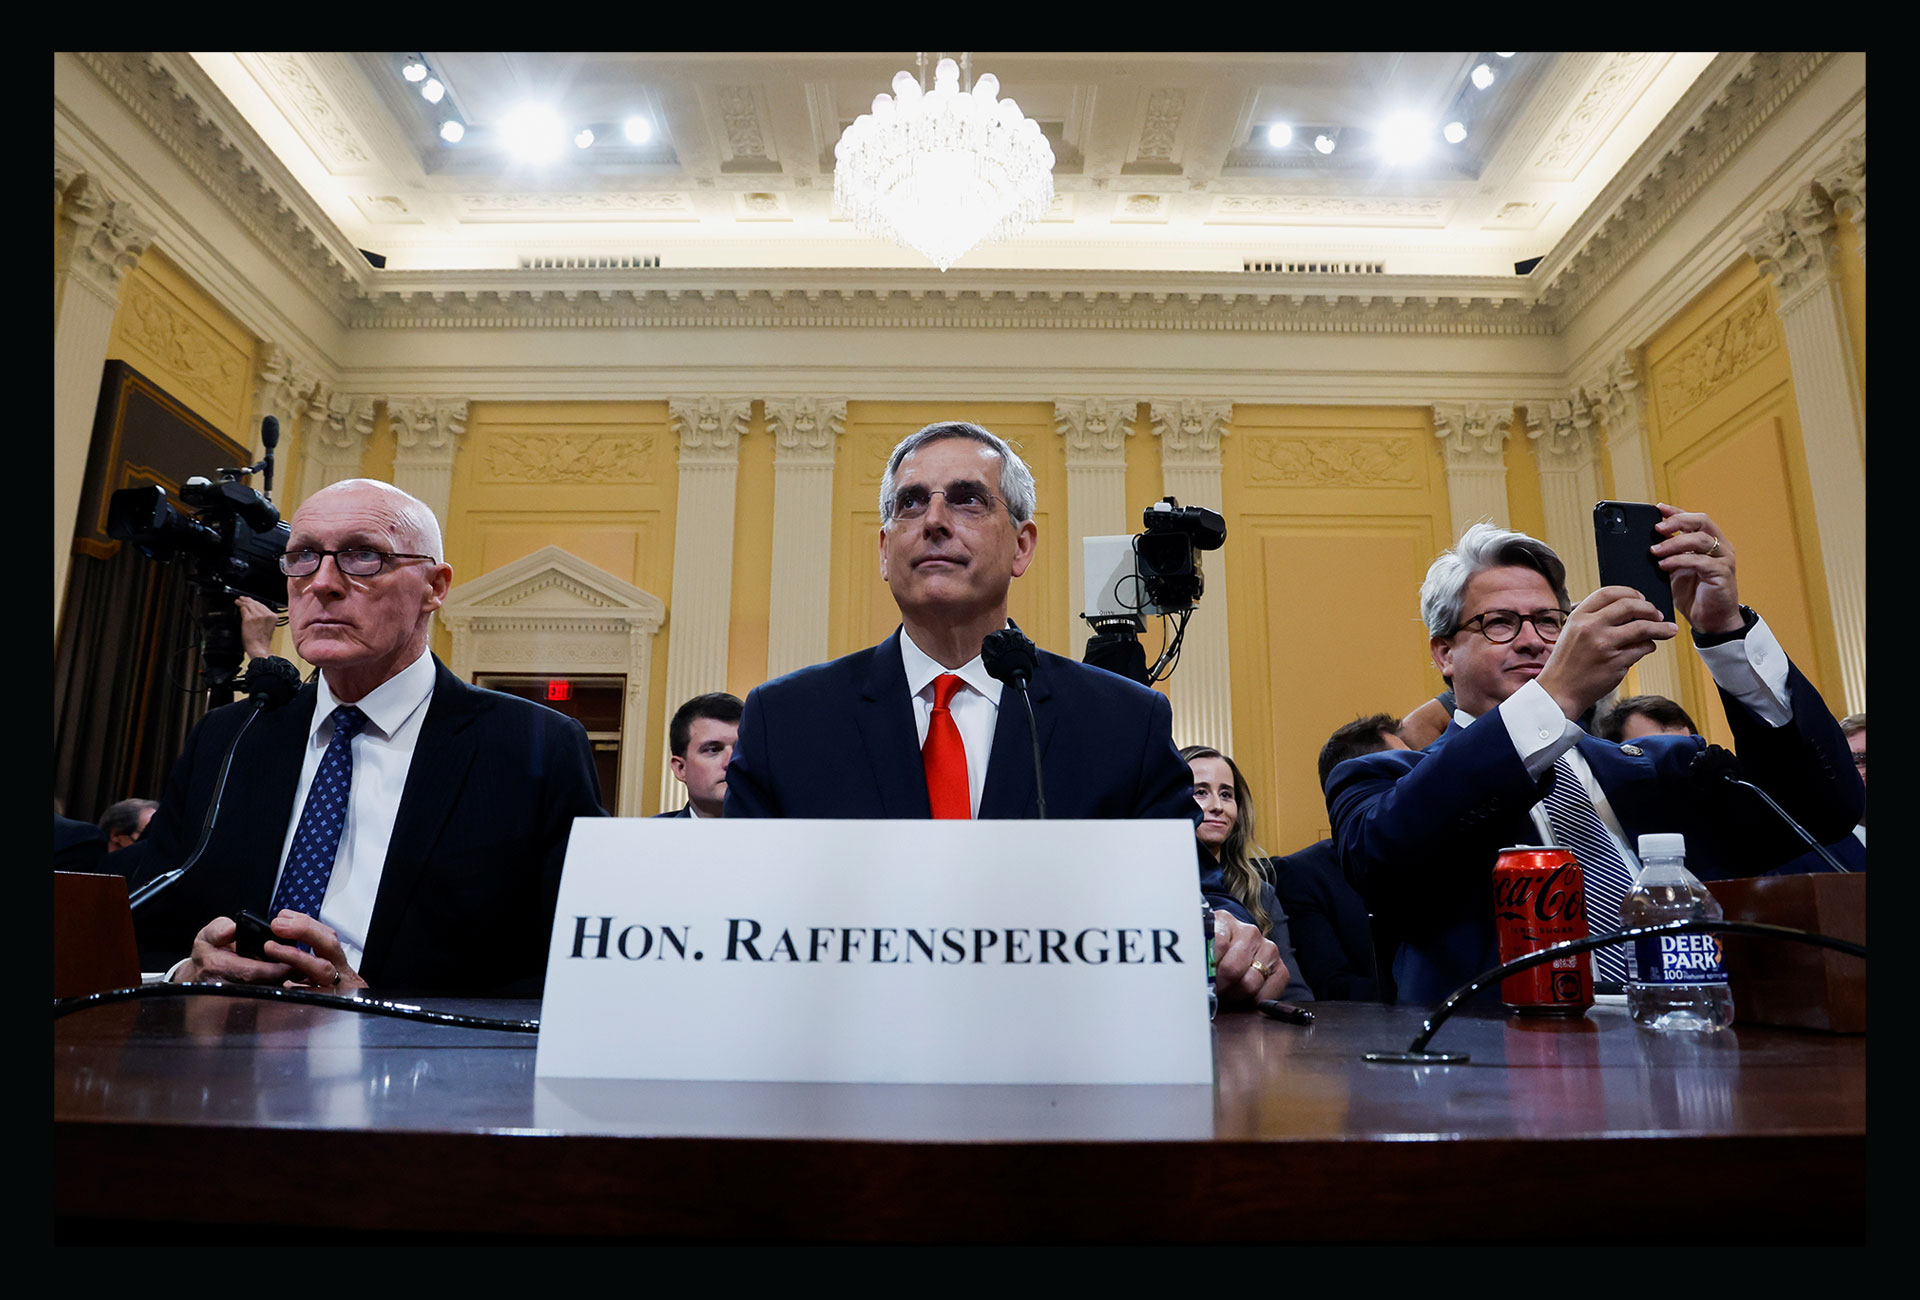 Georgia Secretary of State Brad Raffensperger sits between Arizona House Speaker Rusty Bowers and Georgia Secretary of State Chief Operating Officer Gabriel Sterling during the fourth public hearing of the U.S. House Select Committee to investigate the January 6 Attack on the U.S. Capitol